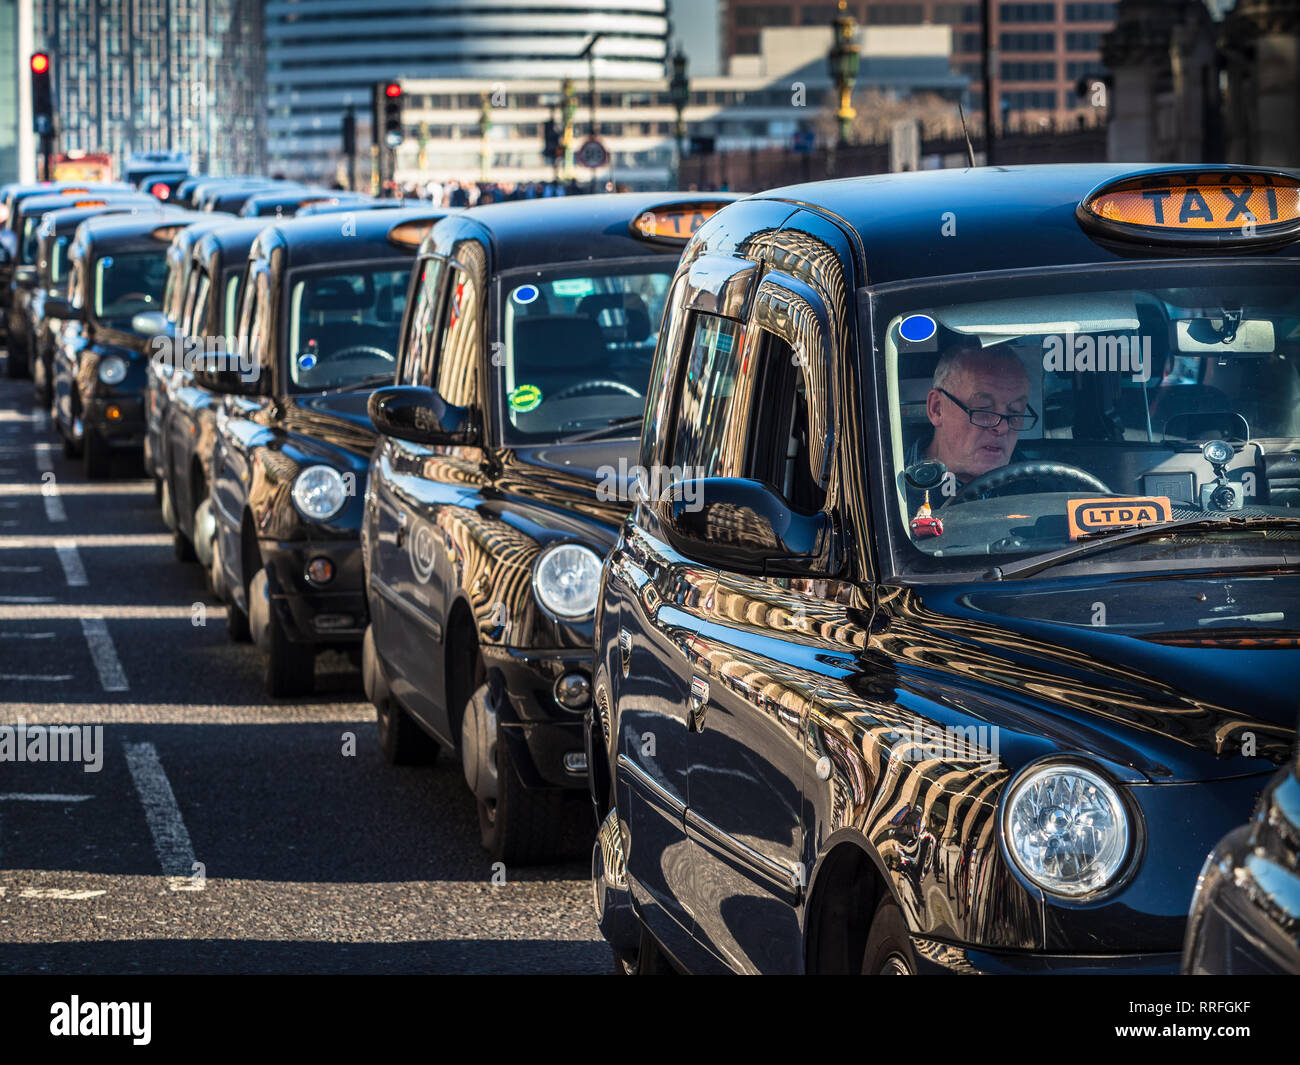 London, UK. 25th Feb, 2019. London Taxi Drivers protest TfL at plans to restrict their access to certain routes as part of a major redevelopment plan Credit: Robert Evans/Alamy Live News Stock Photo